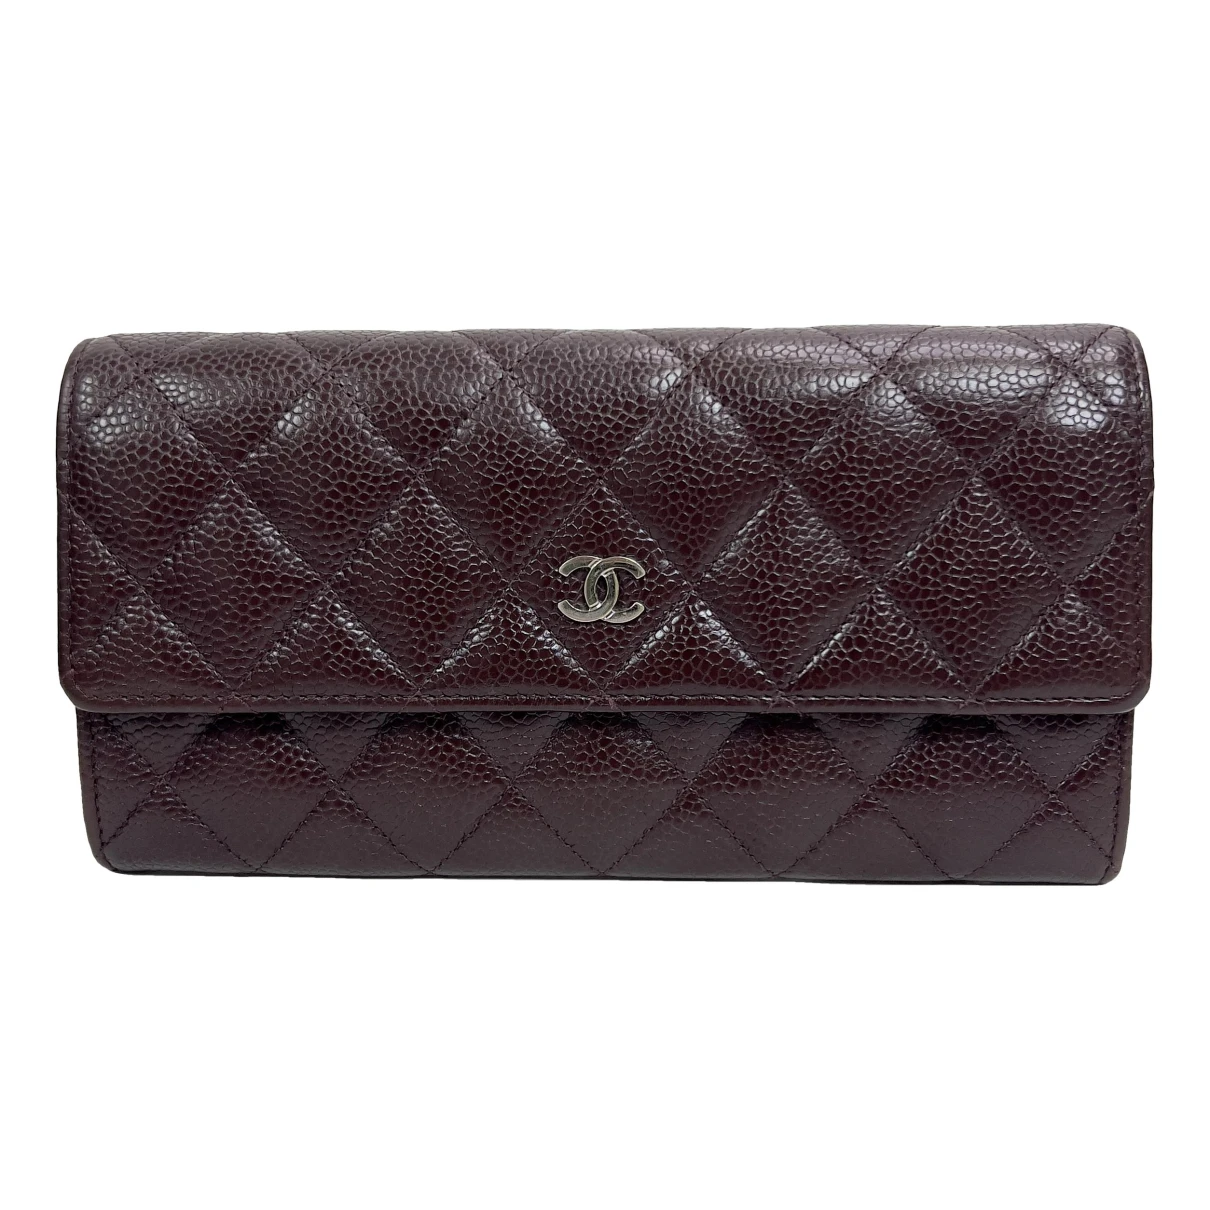 accessories Chanel wallets Timeless/Classique for Female Leather. Used condition